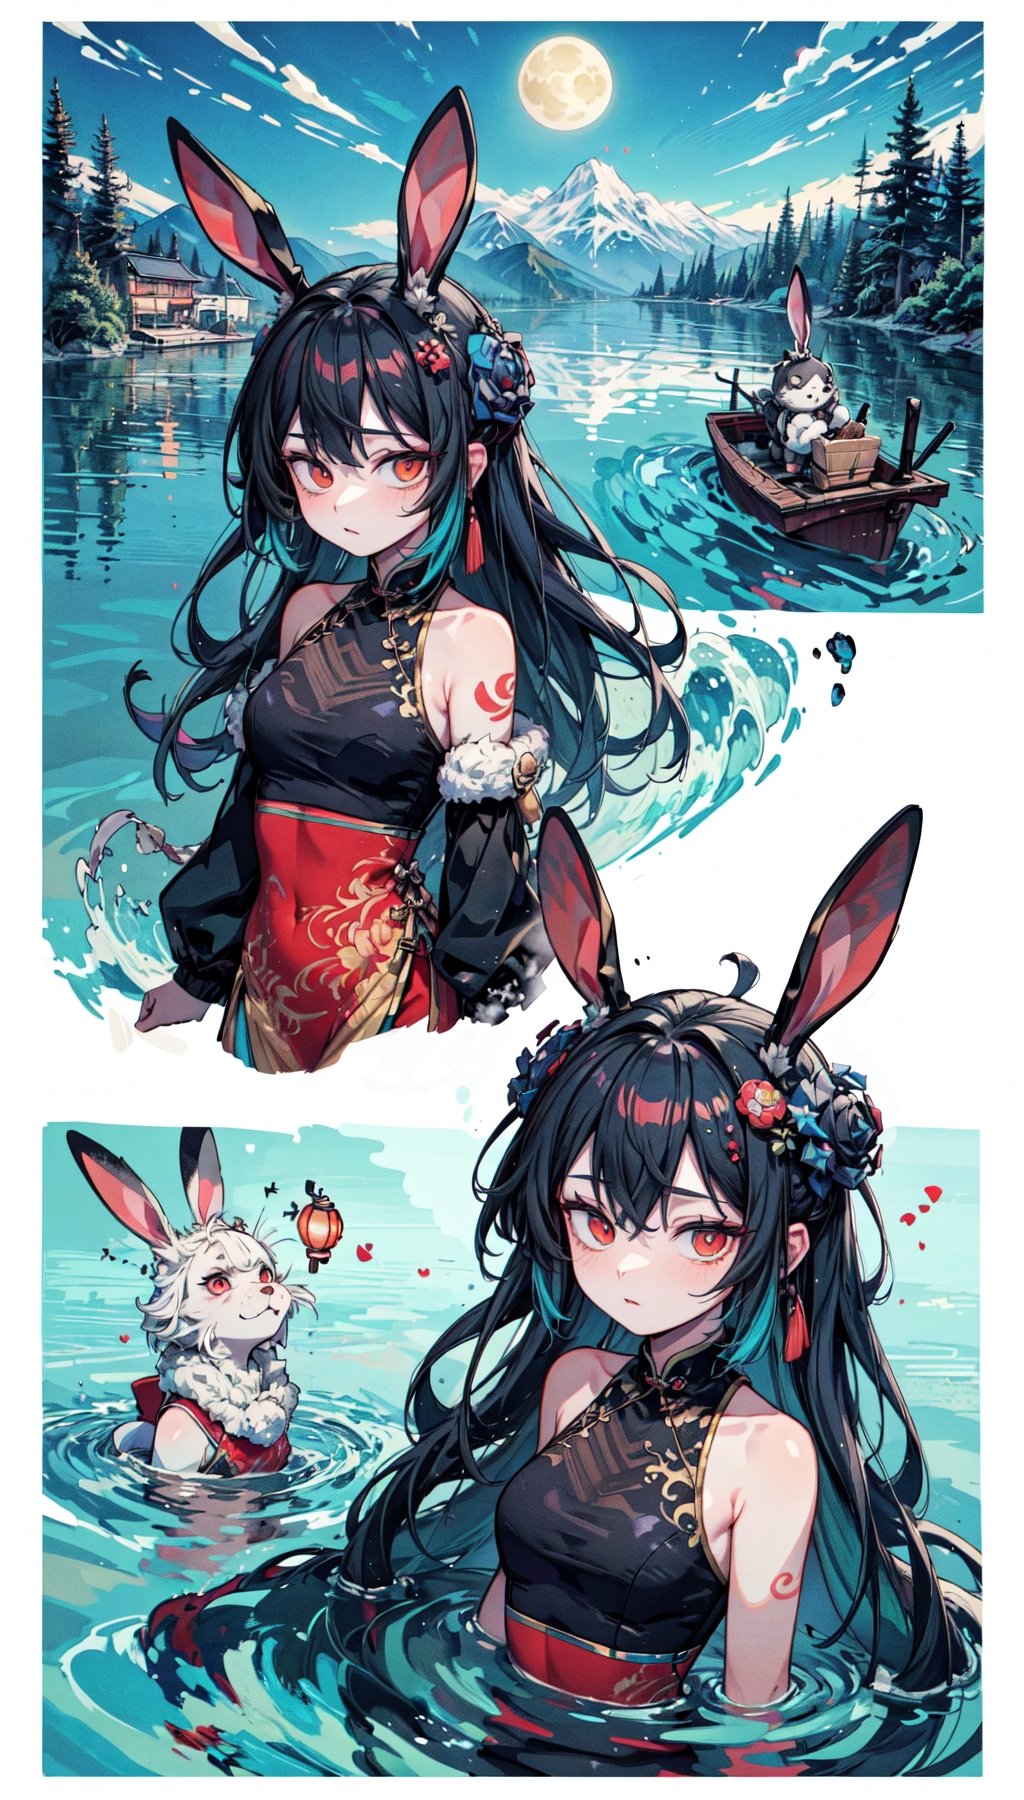 (Best Quality, 8k, 32k, Masterpiece, UHD:1.3), the night, Two rabbits boating on the lake, The background is a bright and bright moon, Blind box, wind, Beautiful, high qulity, cinematic colorgrade, Traditional Chinese elements, National Day Mid-Autumn Festival poster, Blue lake, The breeze ruffled the lake, Ripples spread out, CharacterSheet, (multiple views, full body, upper body, reference sheet:1)